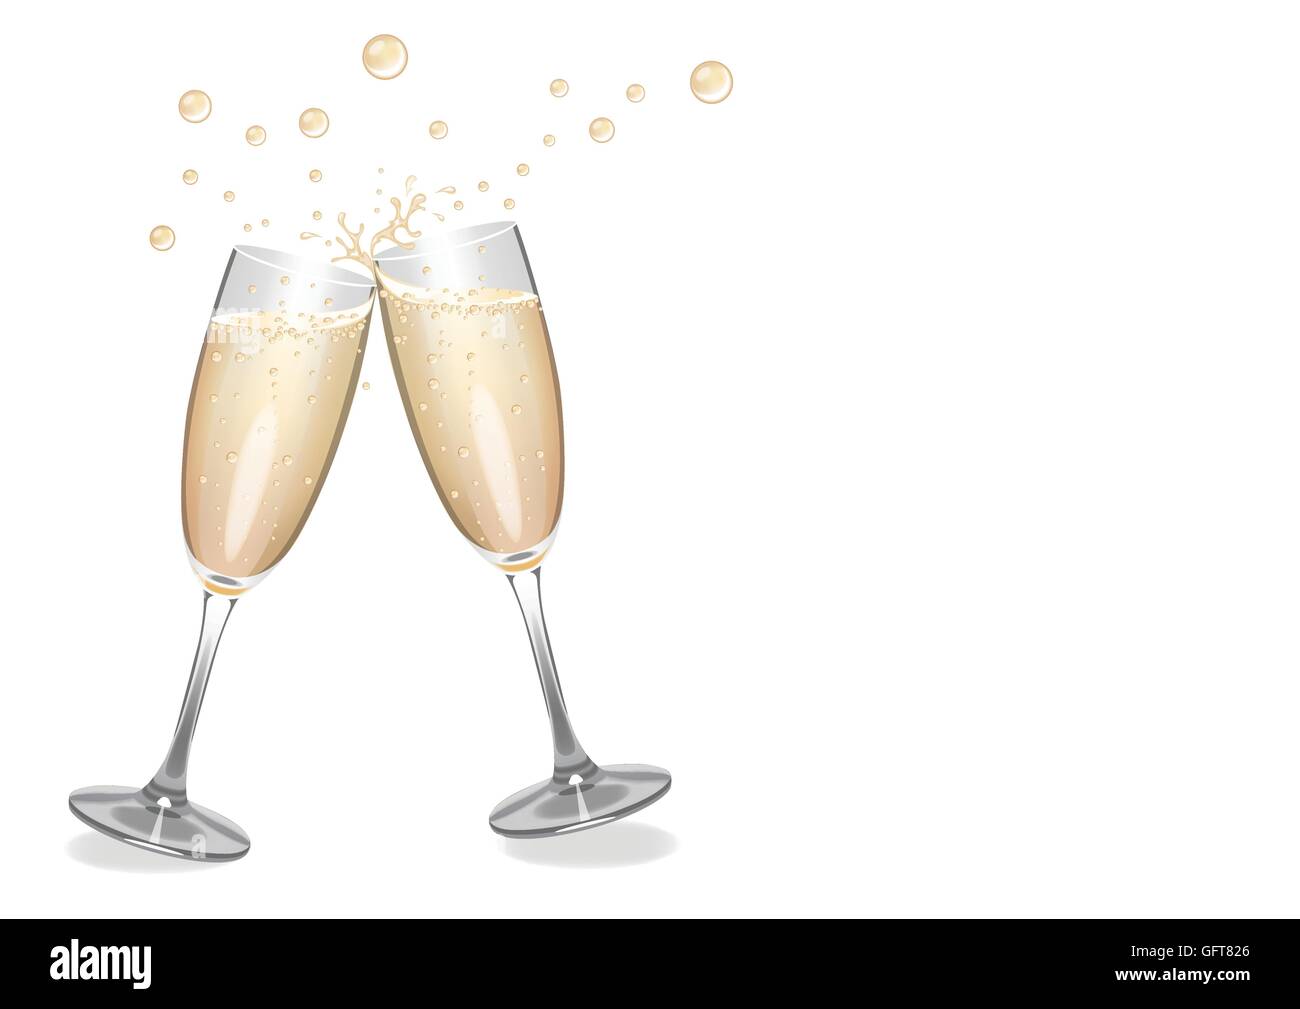 https://c8.alamy.com/comp/GFT826/a-pair-of-champagne-flutes-clinking-together-with-a-bubbly-splash-GFT826.jpg